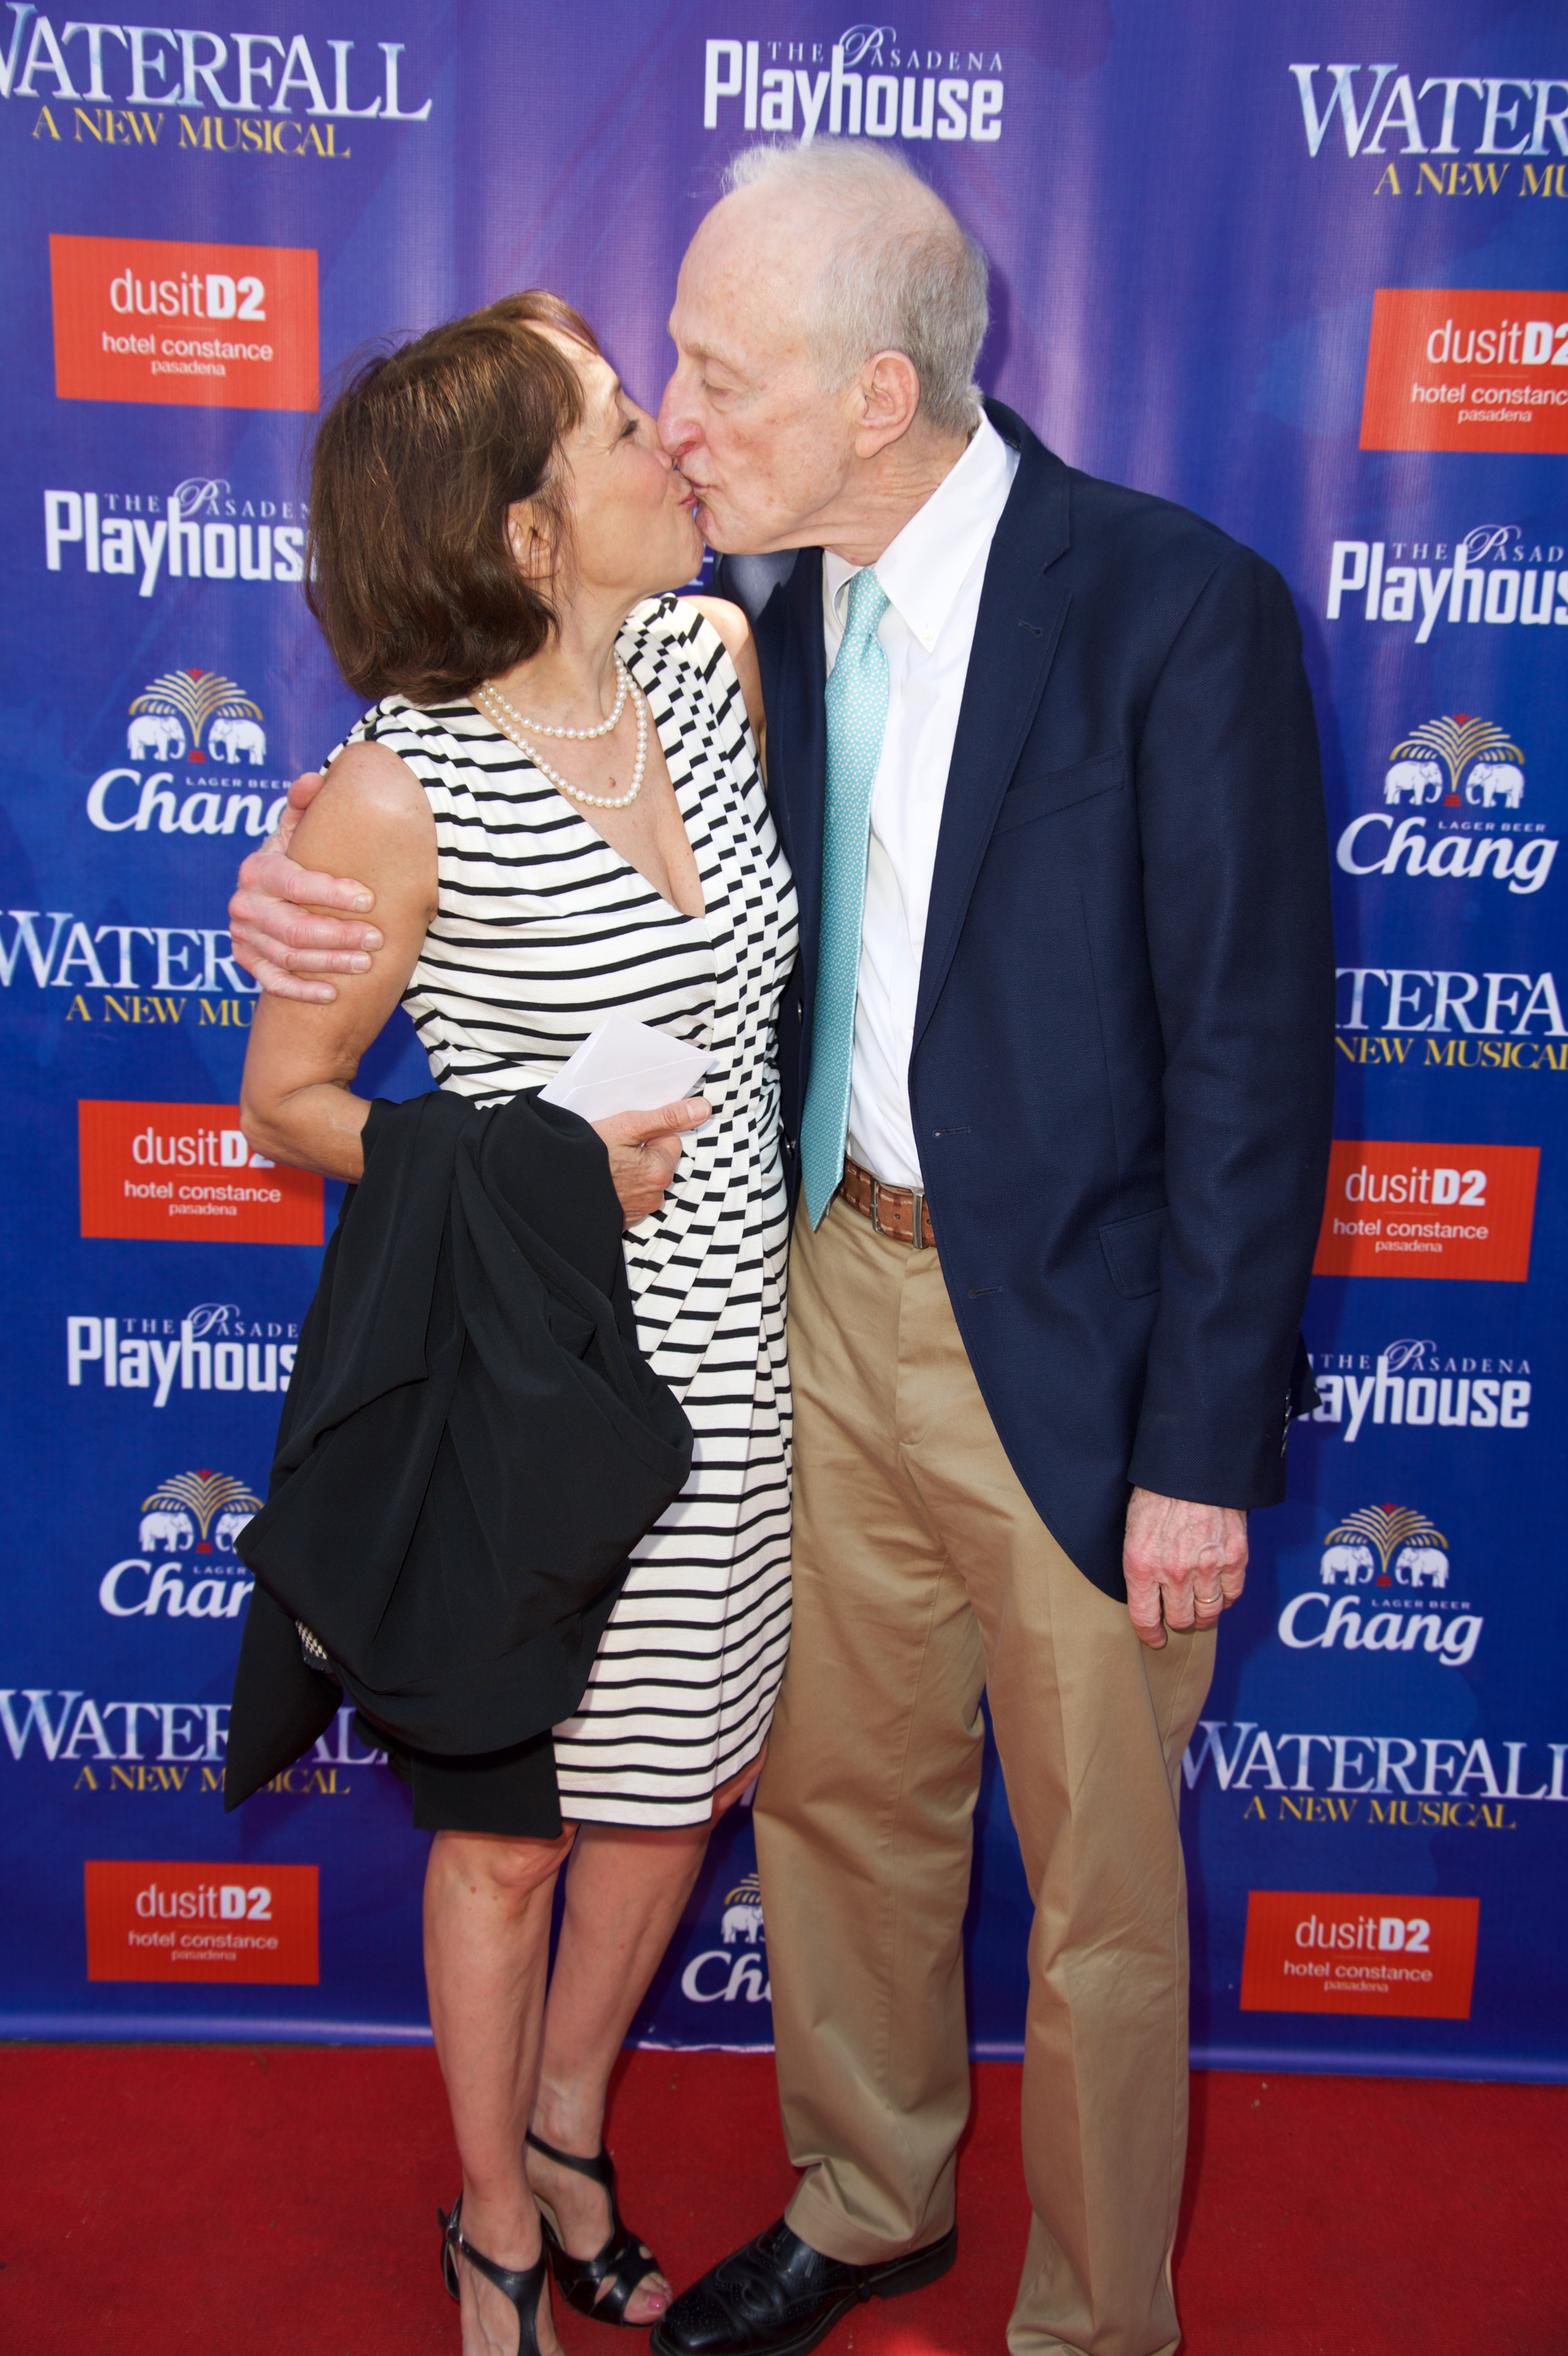 Didi Conn and David Shire attend the opening night performance of "Waterfall" at Pasadena Playhouse on June 7, 2015 in Pasadena, California. | Source: Getty Images